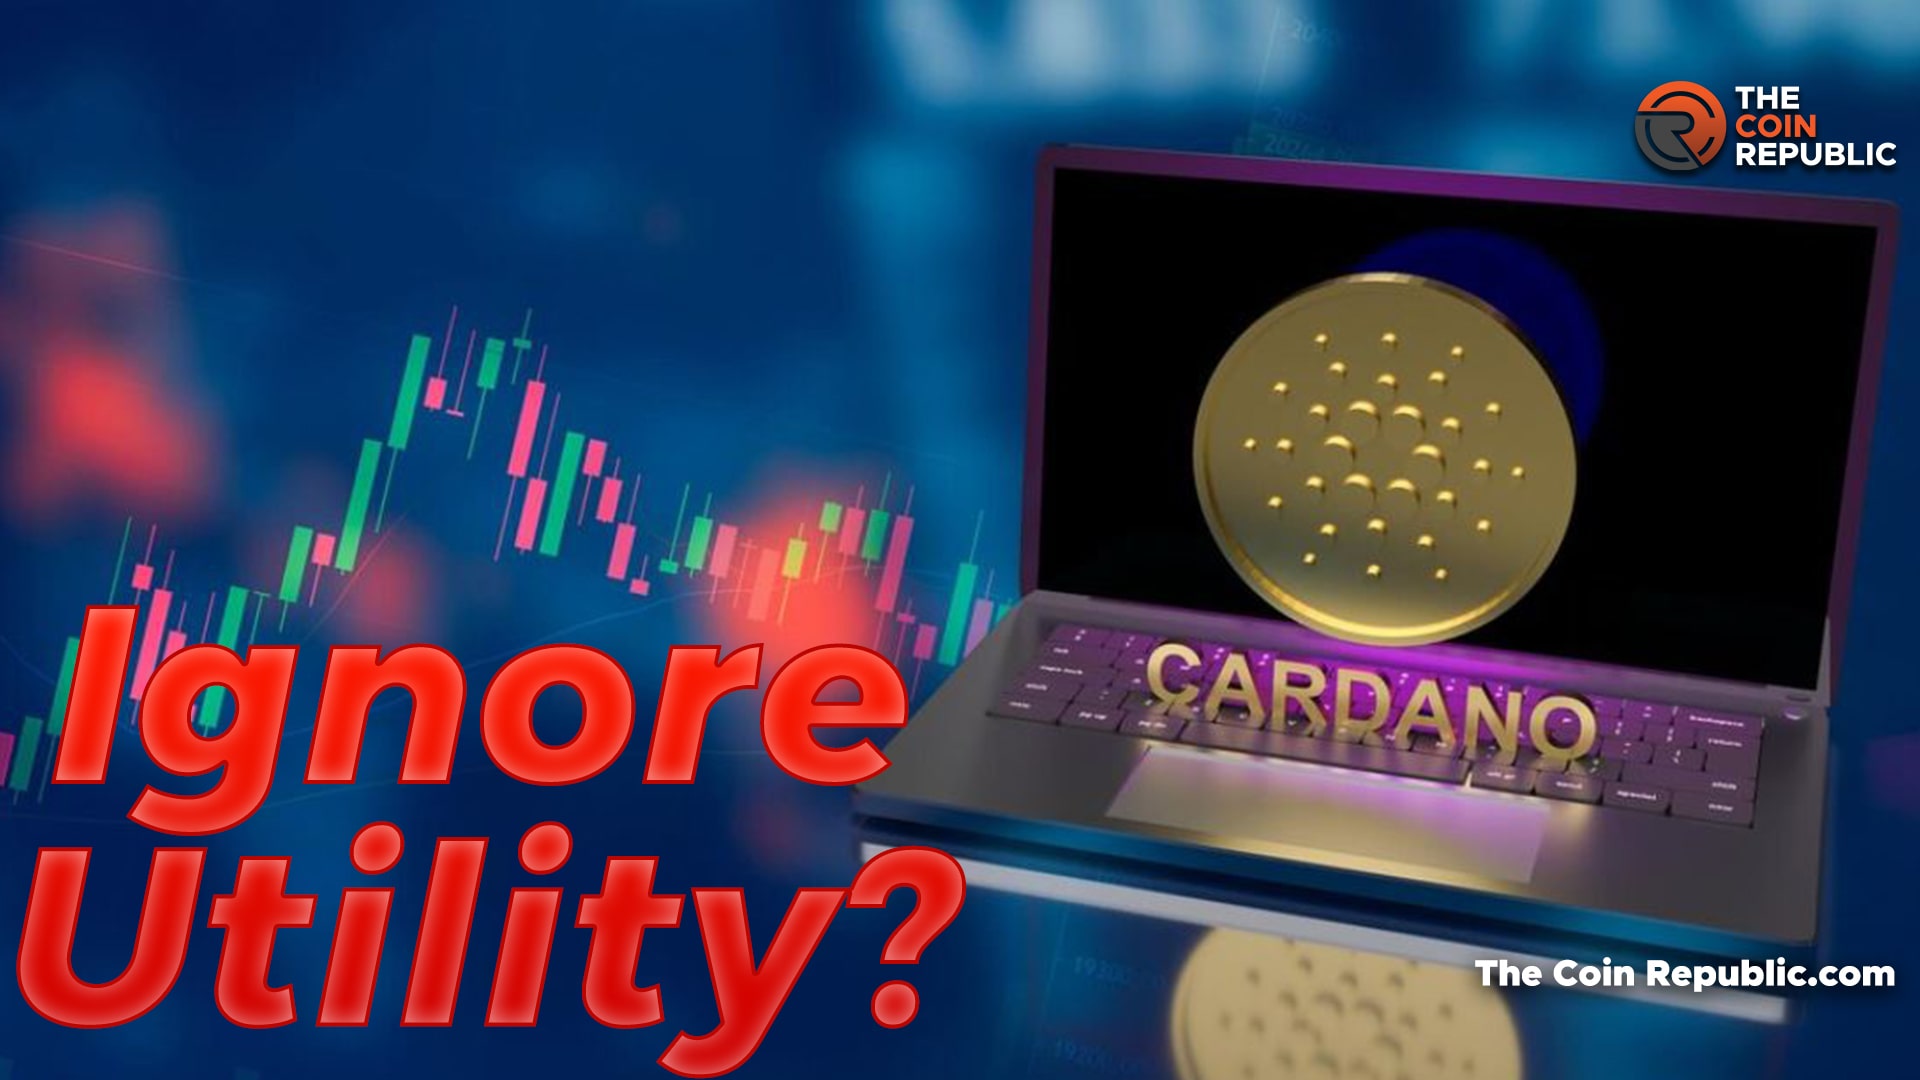 Does Cardano mainly focus on Theory rather than practicality?